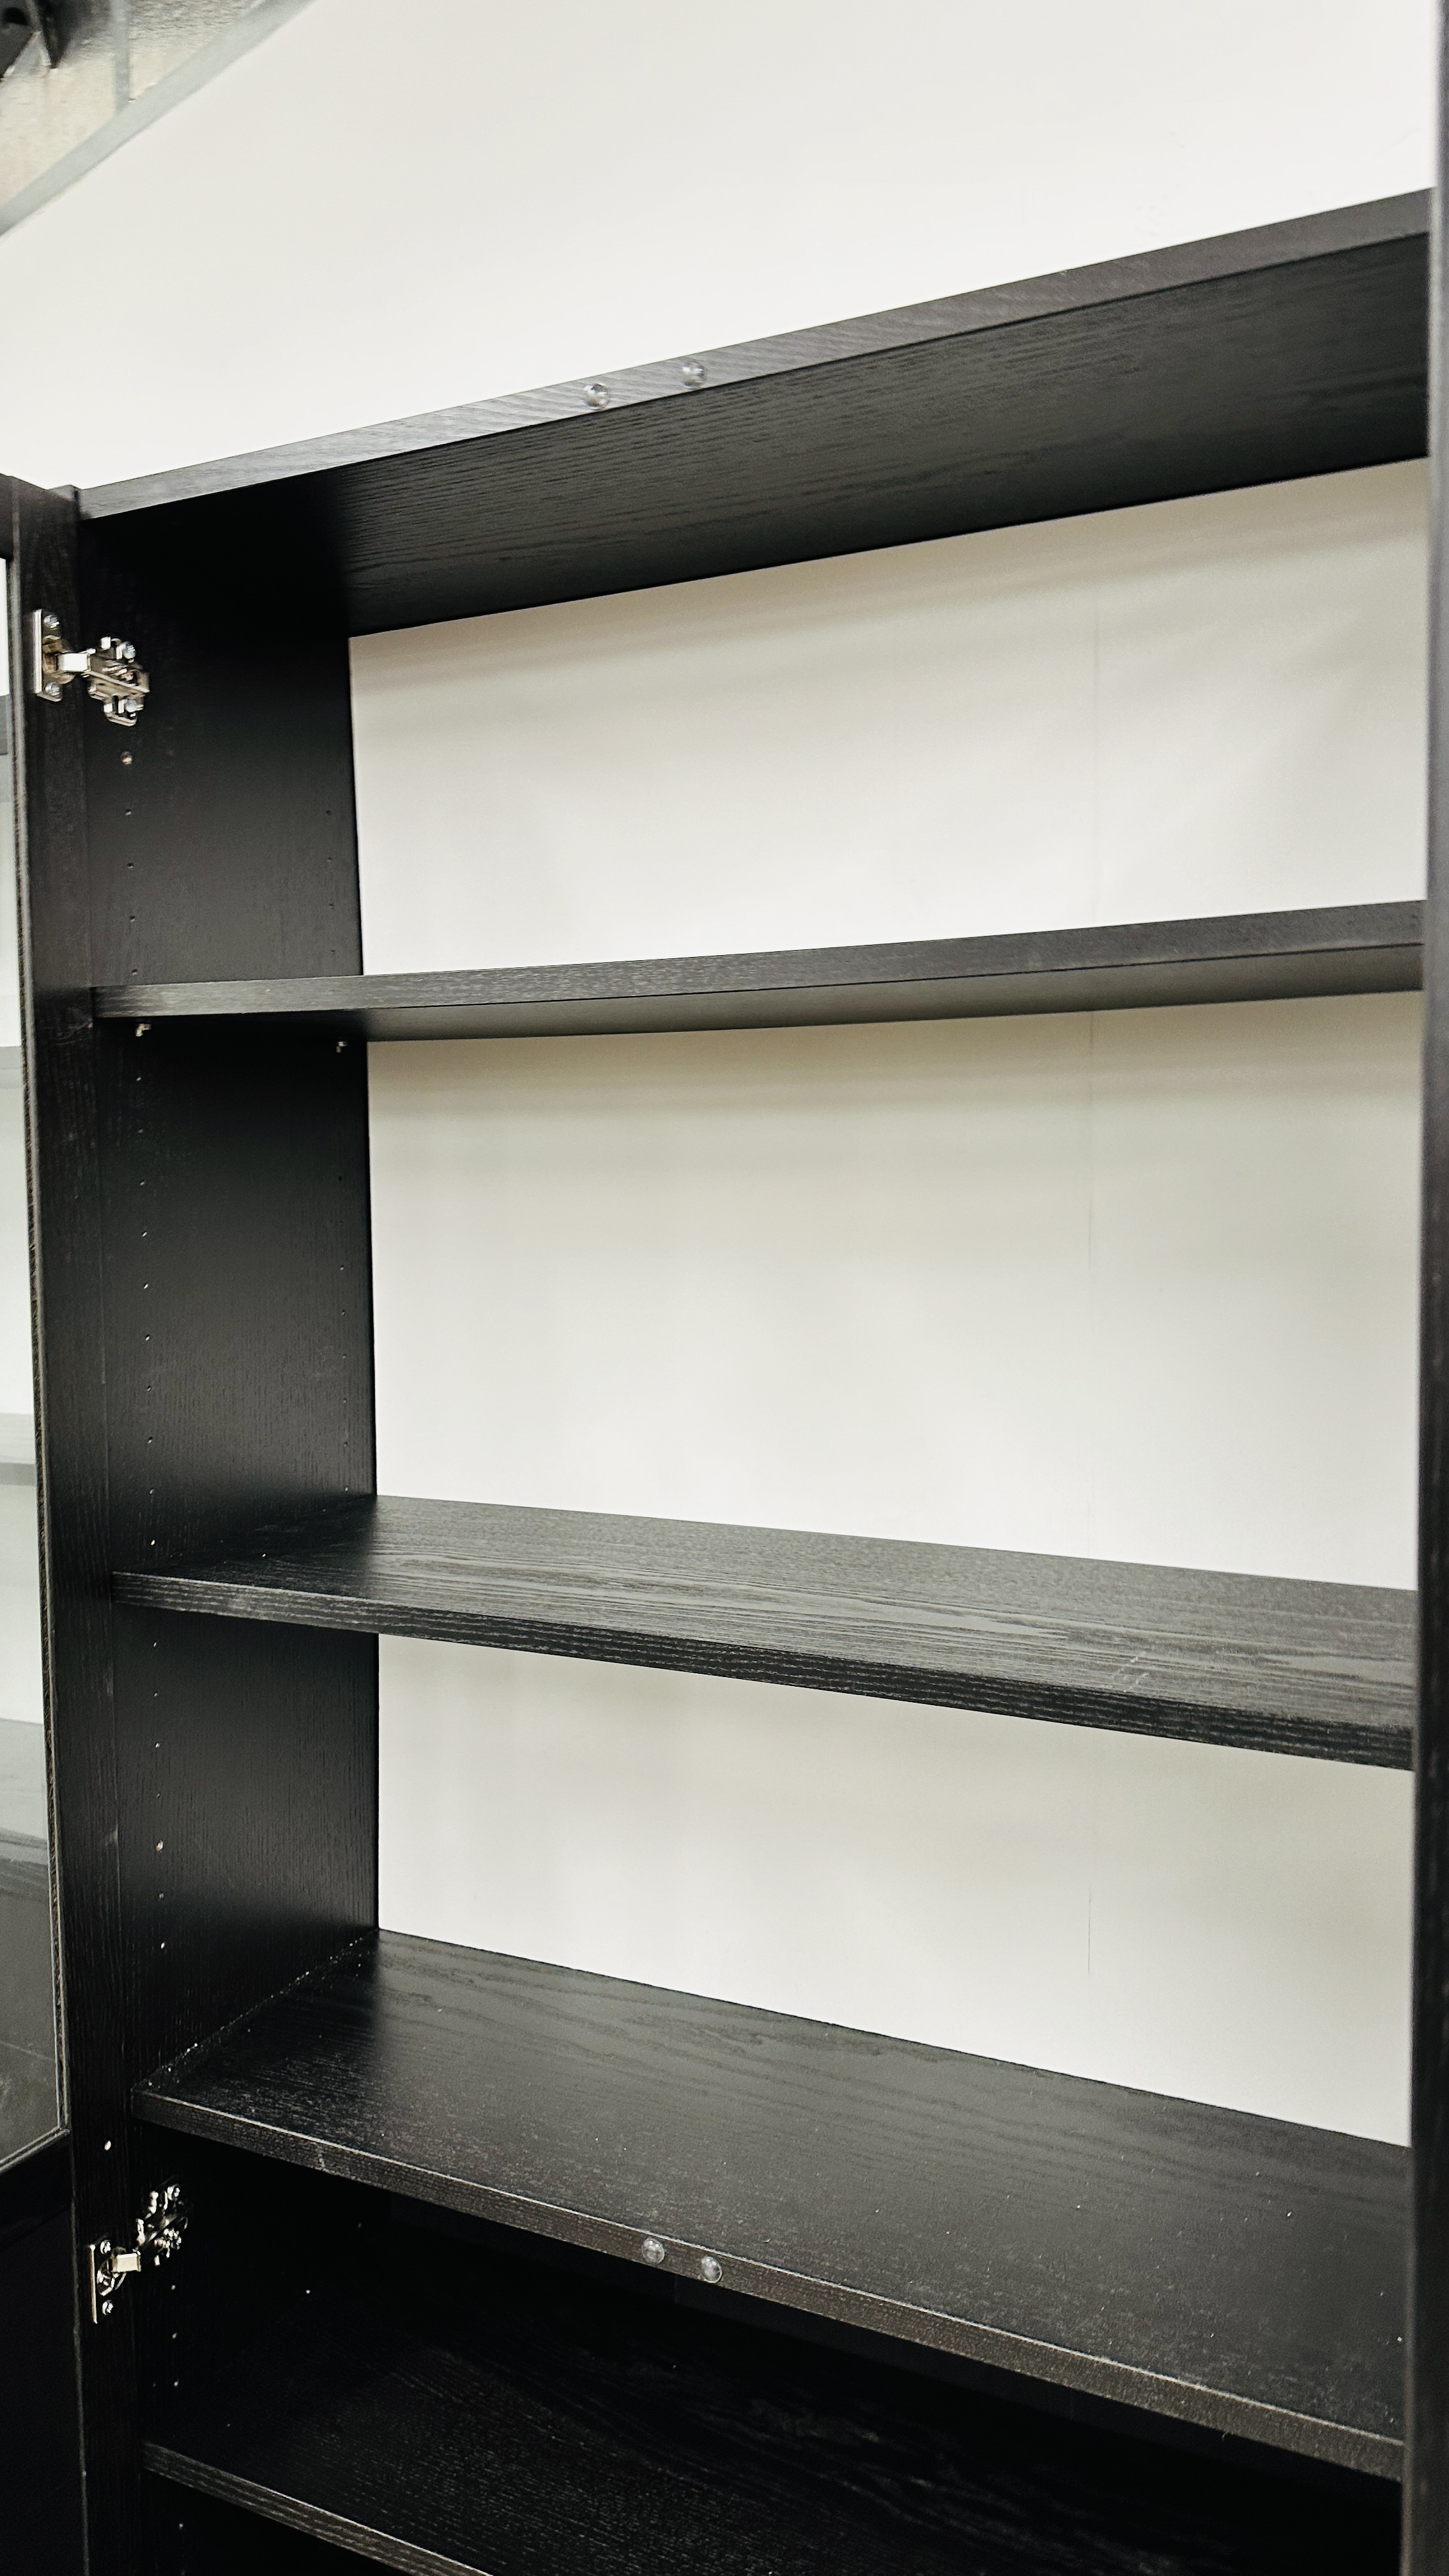 2 X MODERN BLACK ASH EFFECT FINISH FULL HEIGHT WALL CABINETS WITH GLAZED TOPS EACH W 80CM, D 30CM, - Image 8 of 8